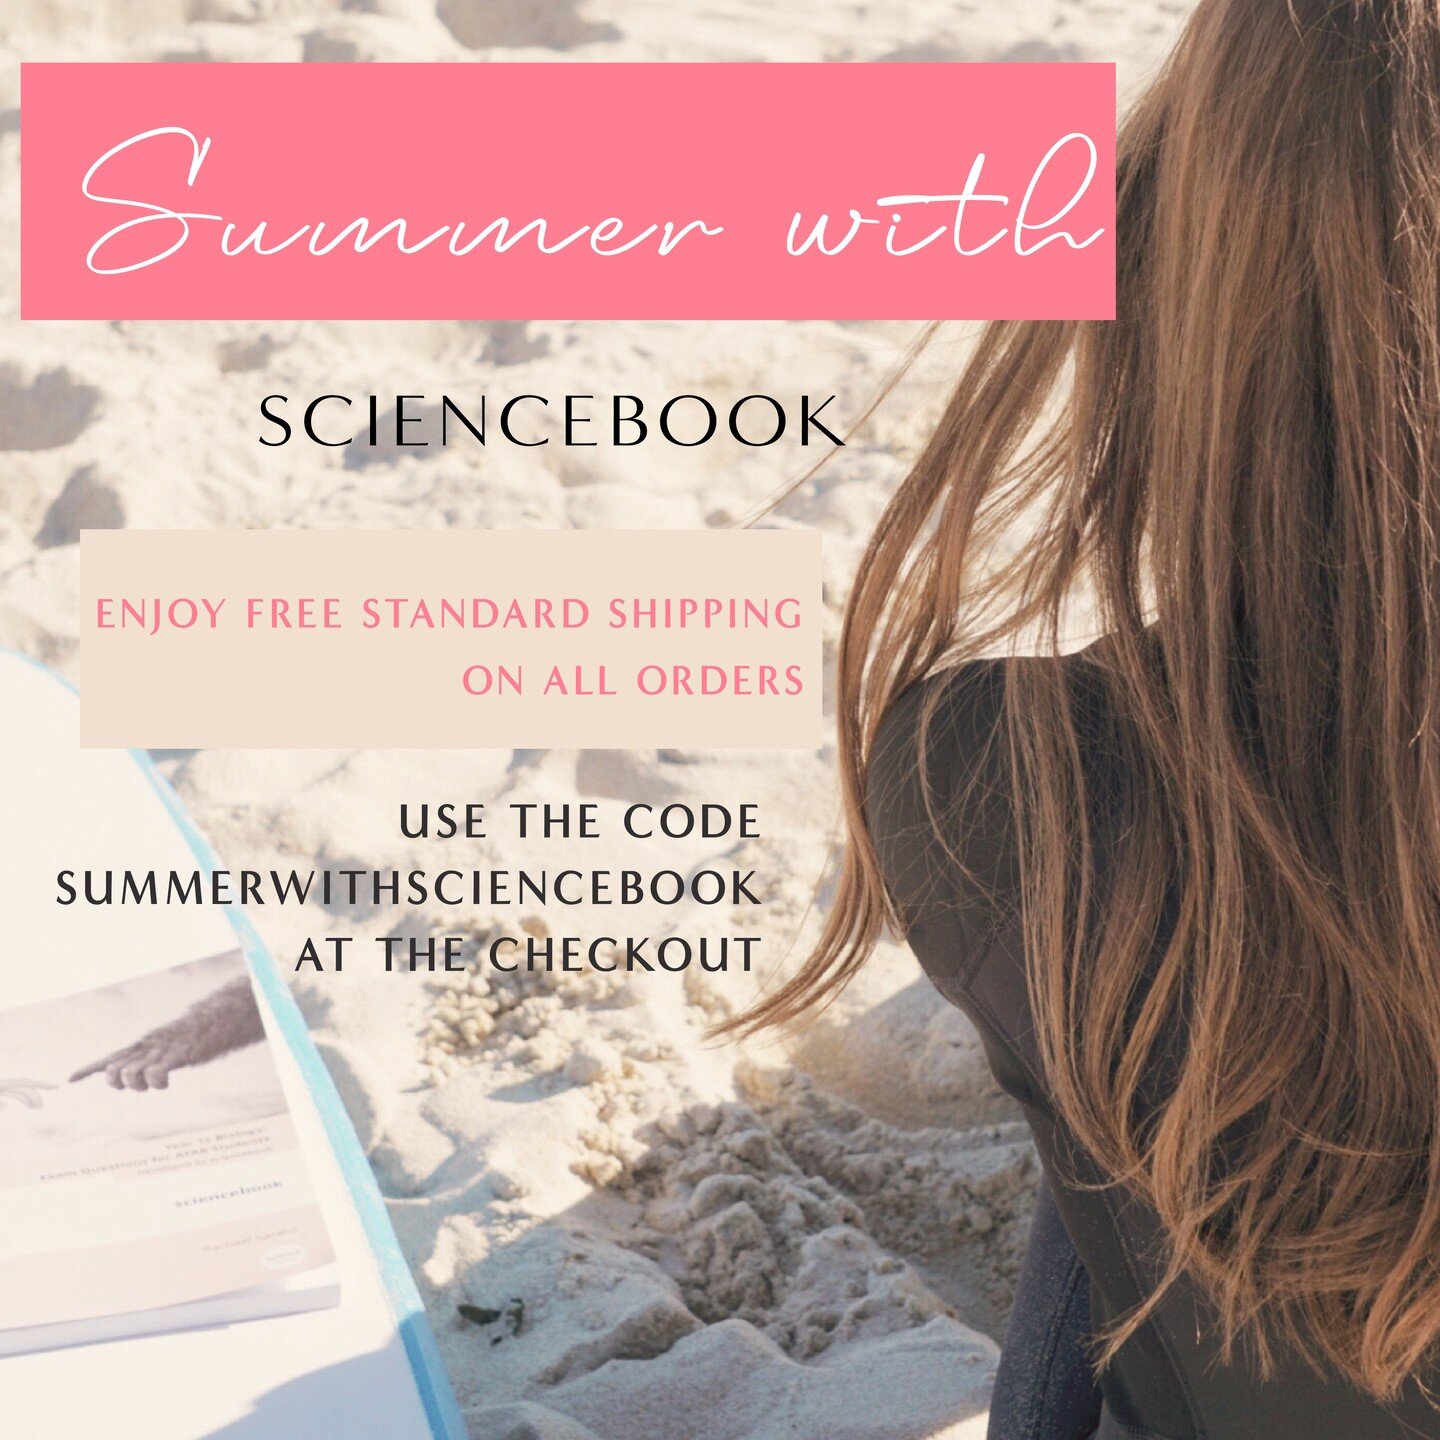 Back to School is here! 

🌞And that means it&rsquo;s time for Summer with Sciencebook 🌞

Enjoy FREE Standard Shipping on ALL ORDERS. 

Use the code SUMMERWITHSCIENCEBOOK at the checkout. 

Take a look around and find something you love! 

💗 Freshl